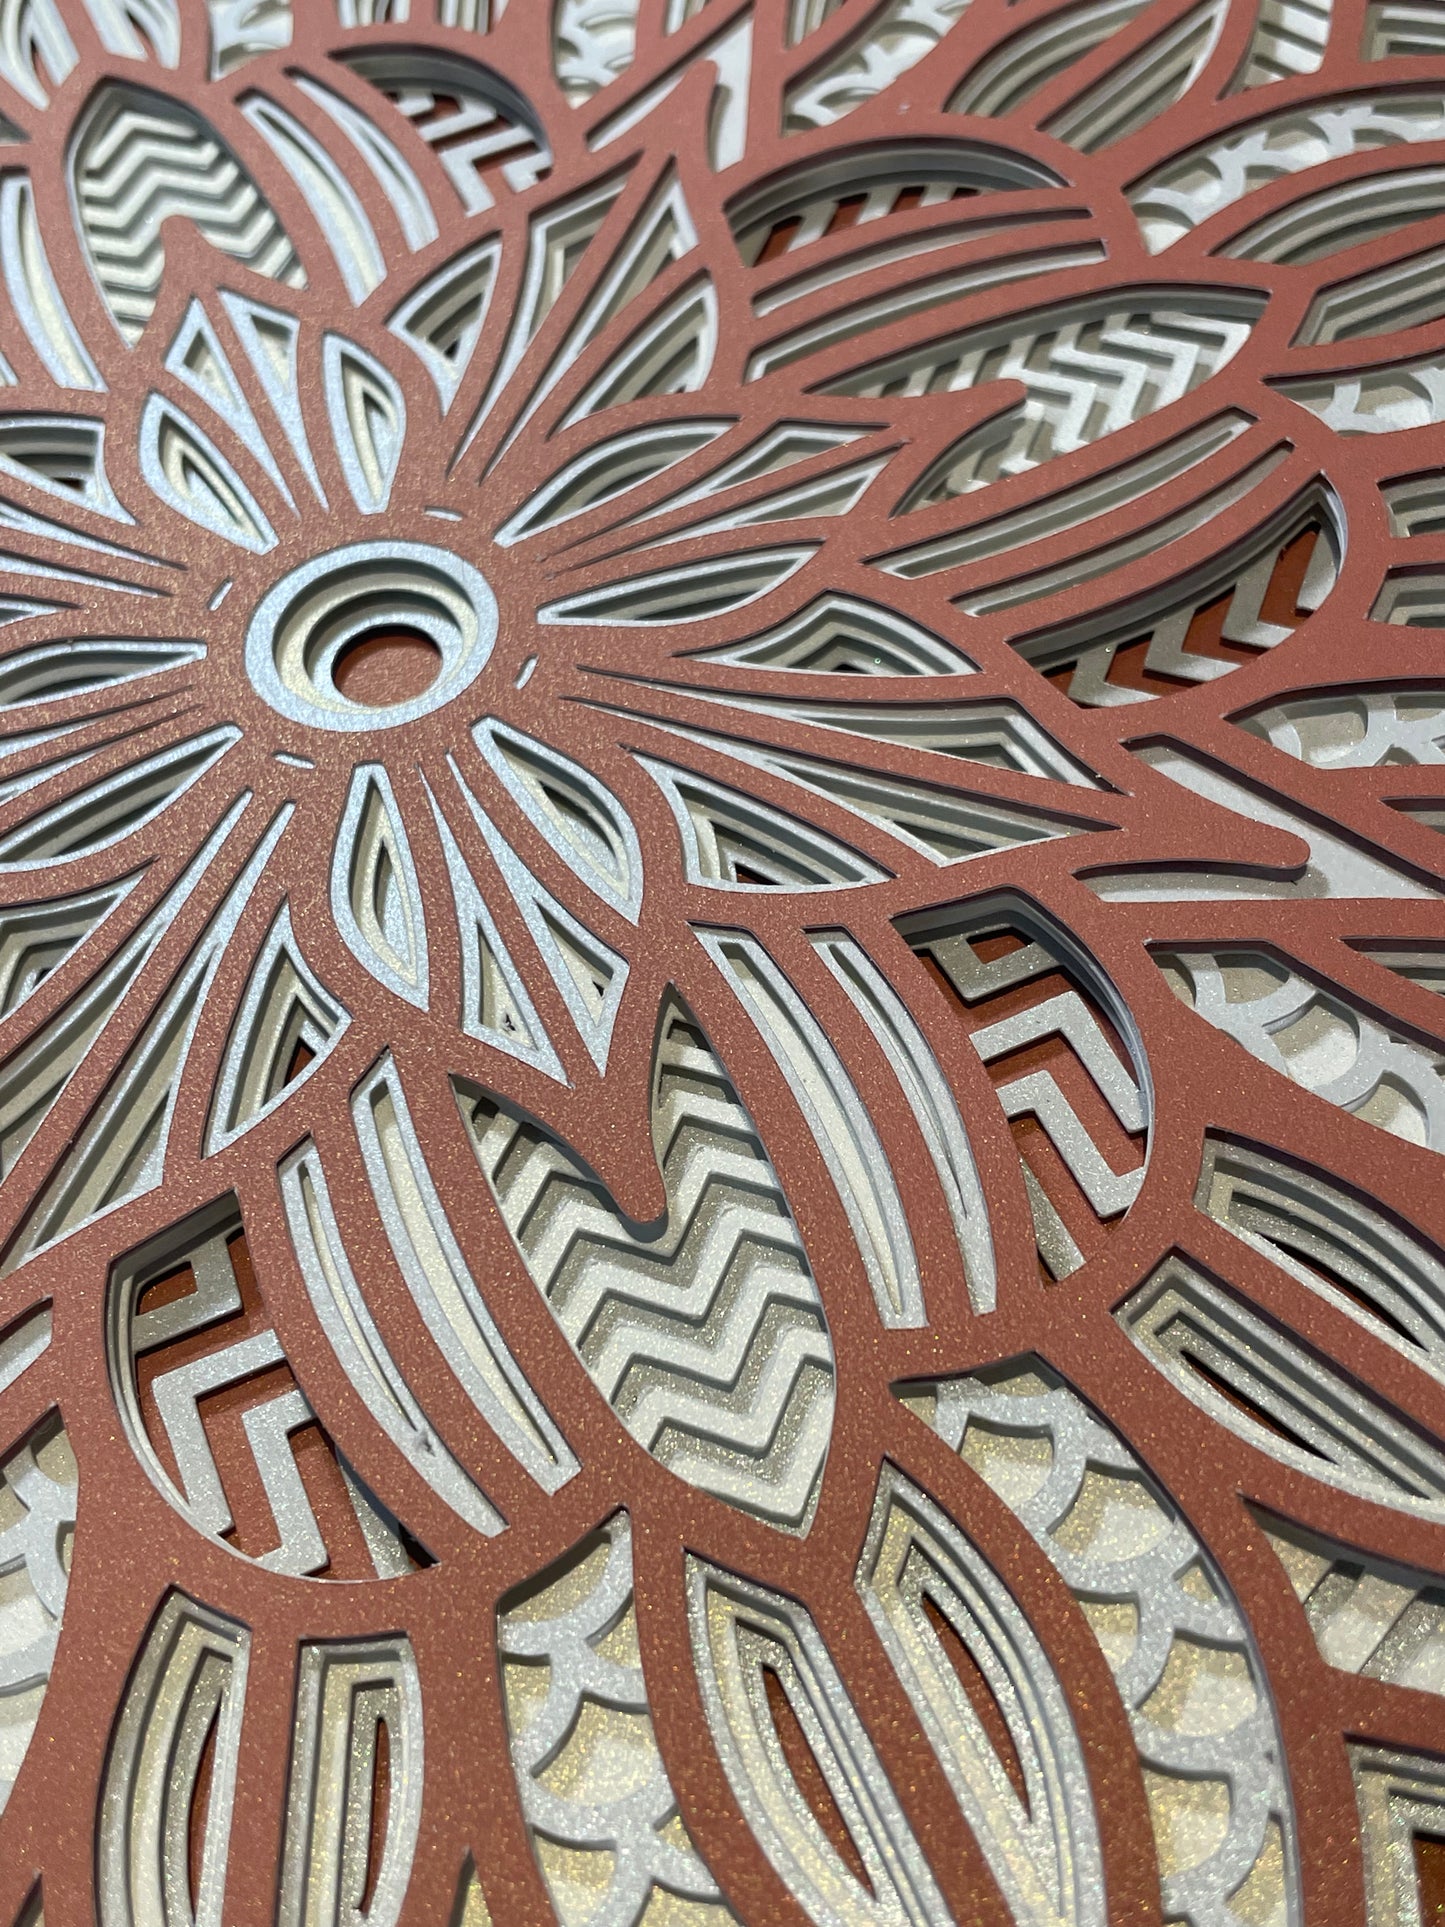 Close up view of 3d layered Mandala SVG Design by Home Stitchery Decor.  Find all your favorite intricate 3d layered Mandala designs on our website.  Follow along with our complete Cricut Mandala 3d designs. 